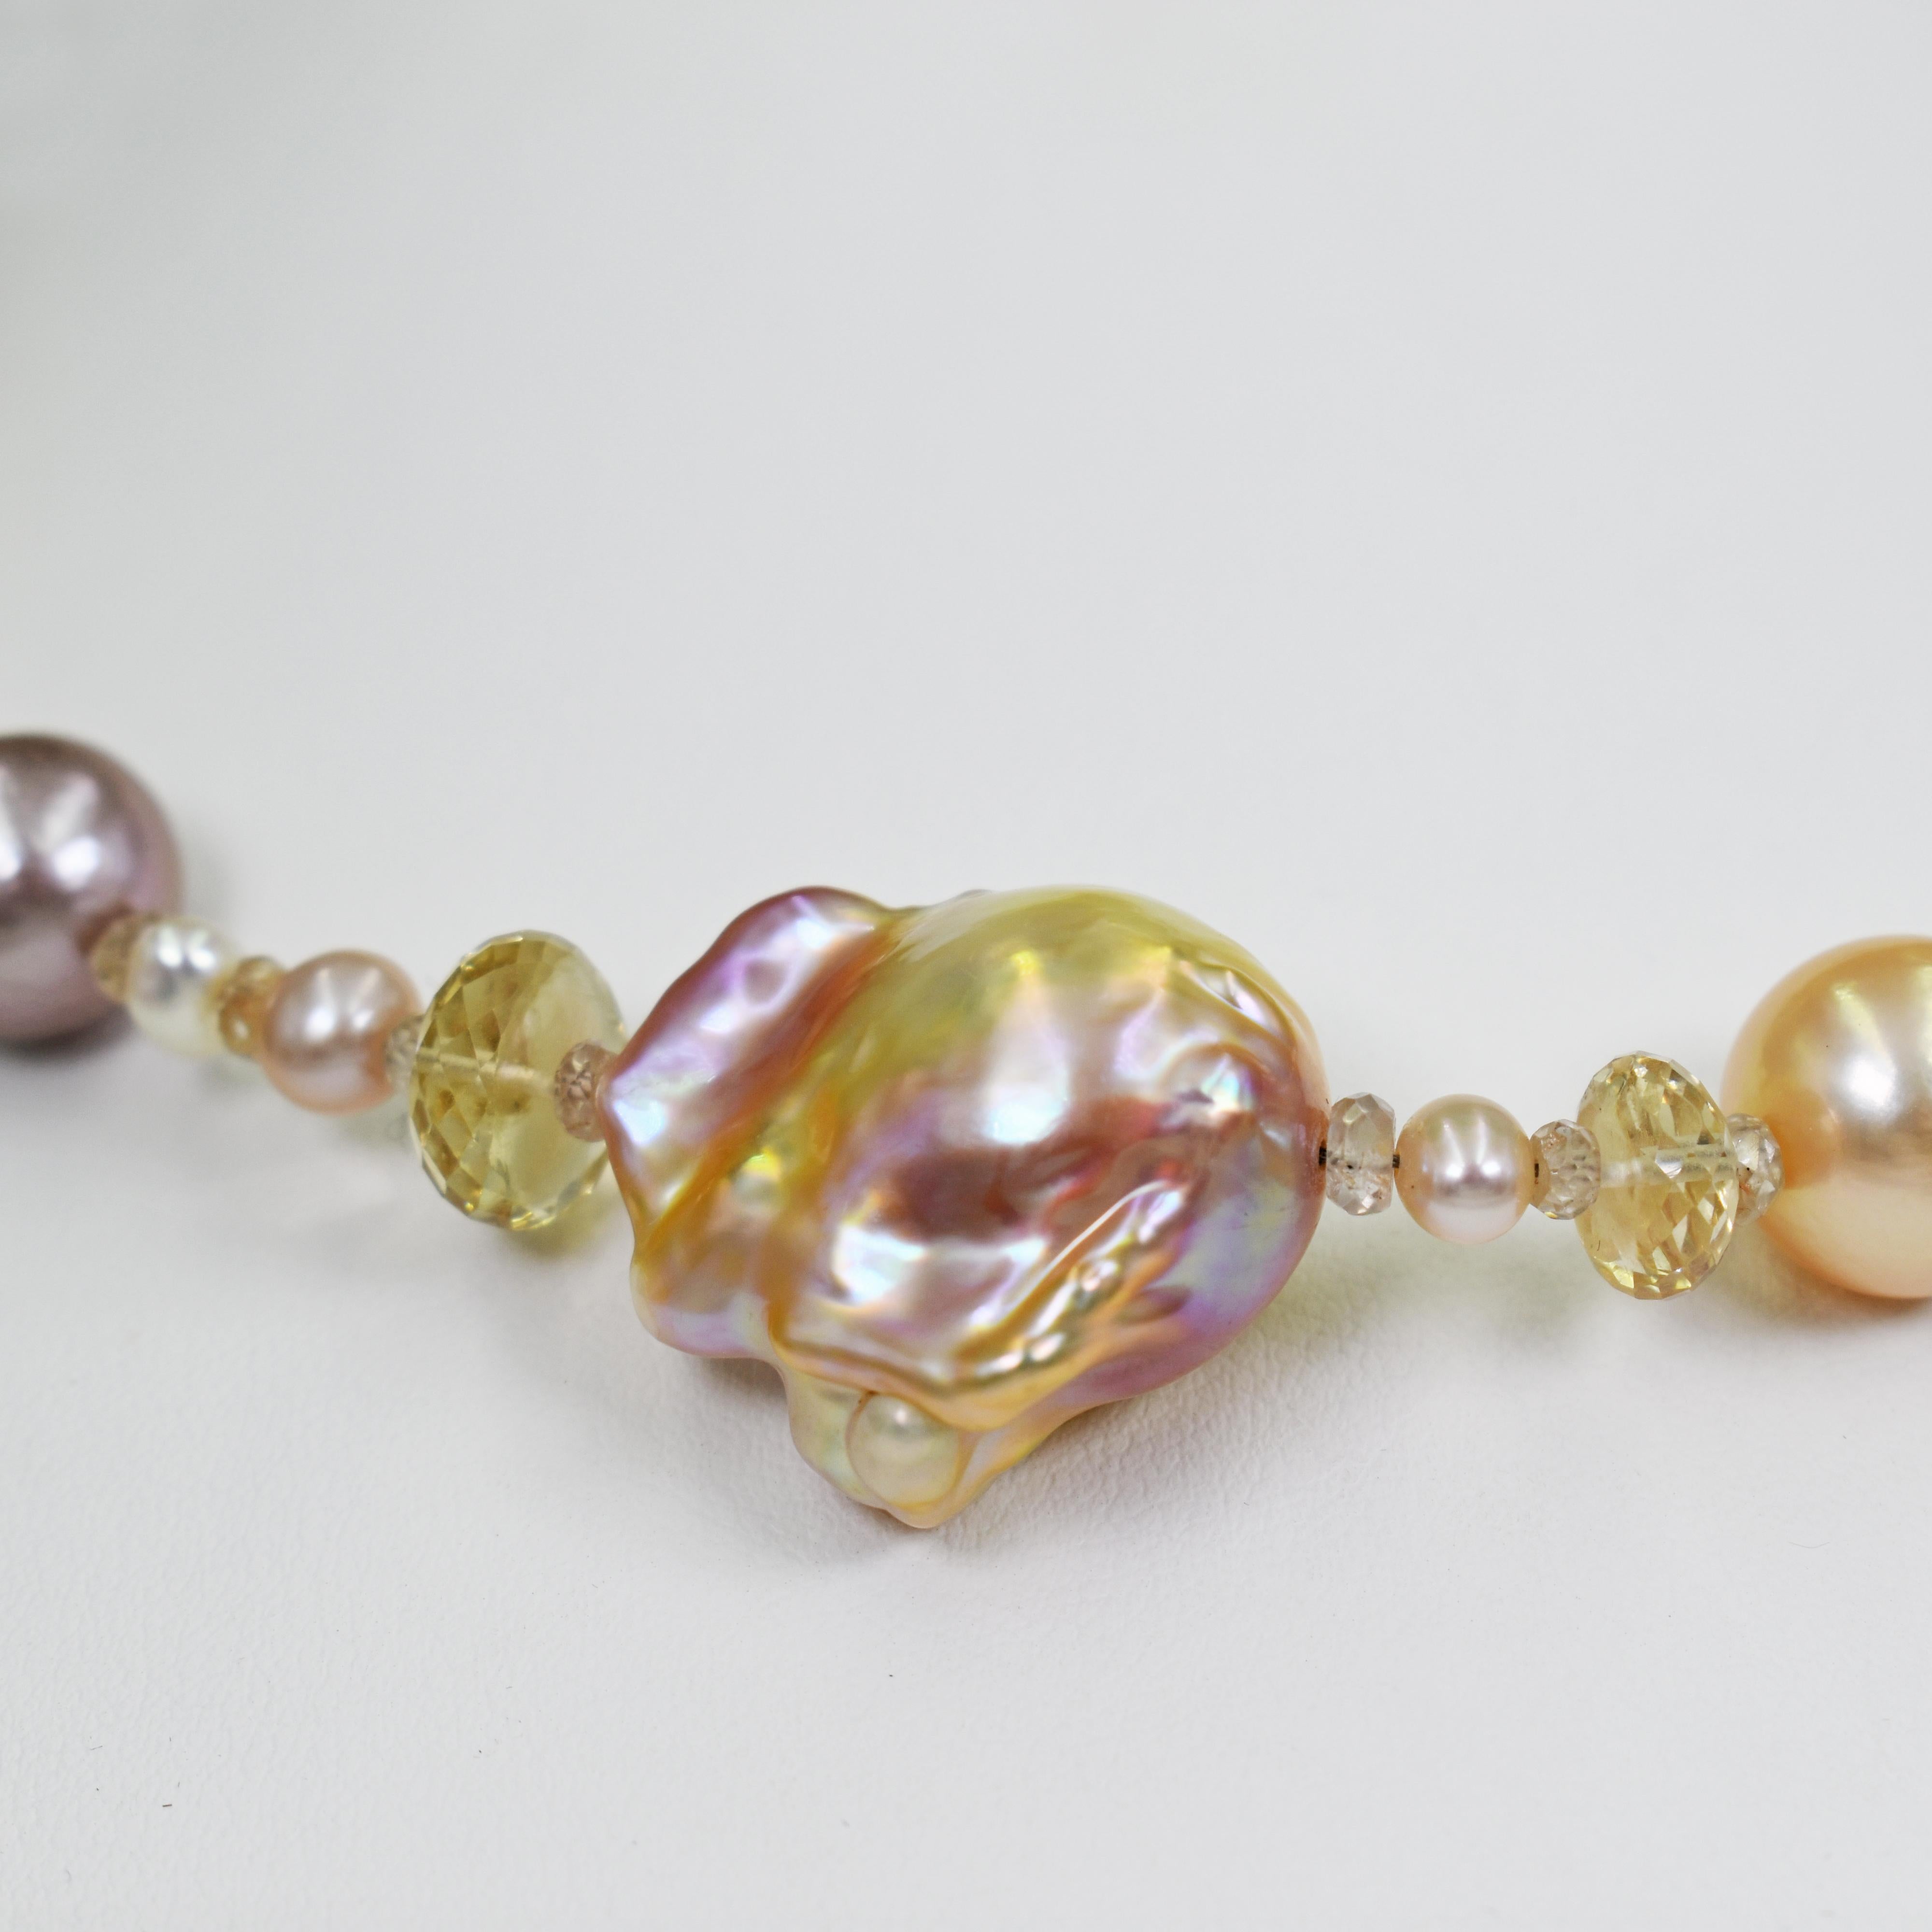 Baroque and round pink, peach and purple color Freshwater Pearls with faceted accent champagne Sunstone beads and finished with a solid 22k yellow gold hook closure. Beaded necklace is 17.5 inches in length. Round pearls range from 4mm to 14mm, and